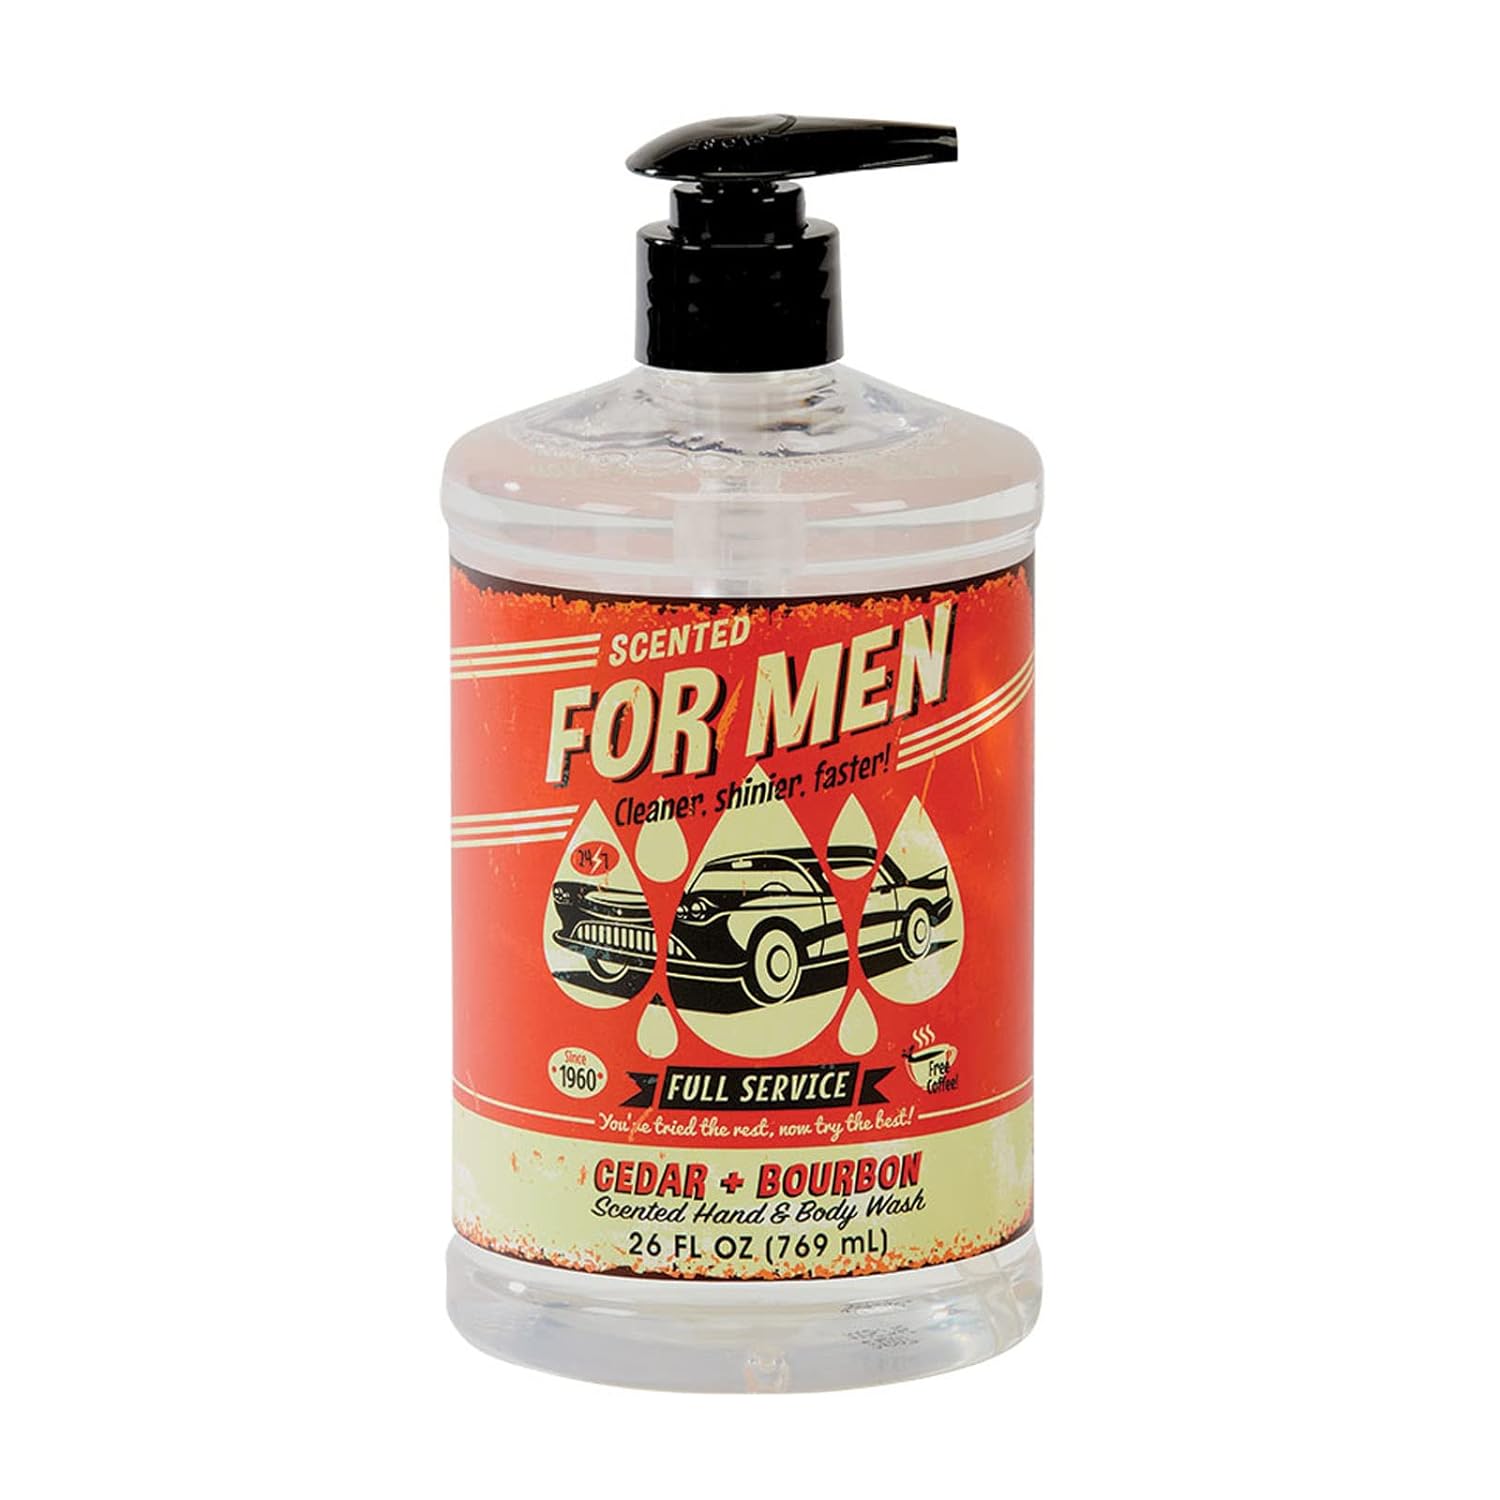 San Francisco Soap Company Scented for Men Cedar and Bourbon Hand and Body Wash